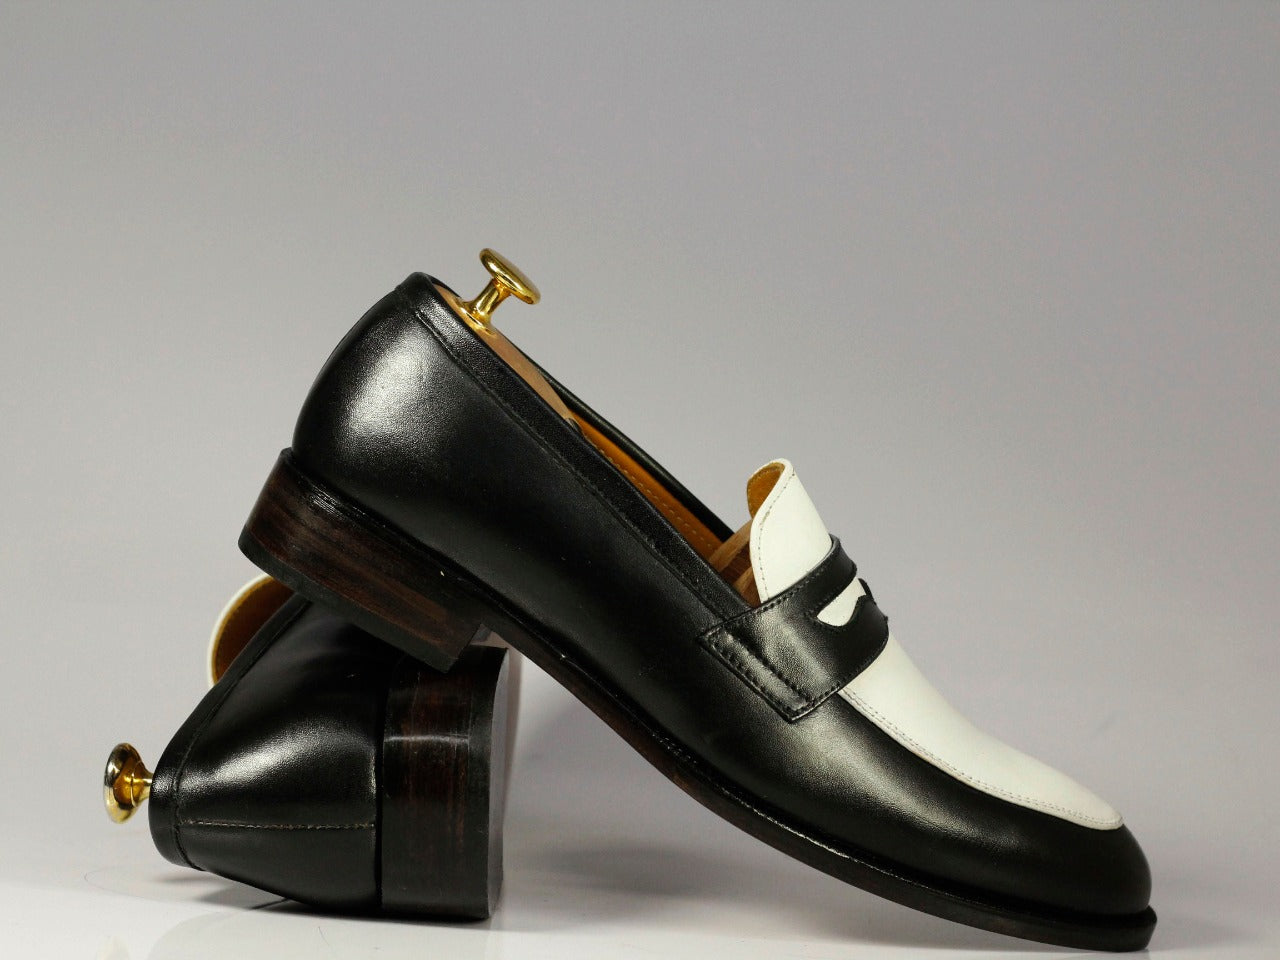 Penny Loafer College black shoes in leather for men